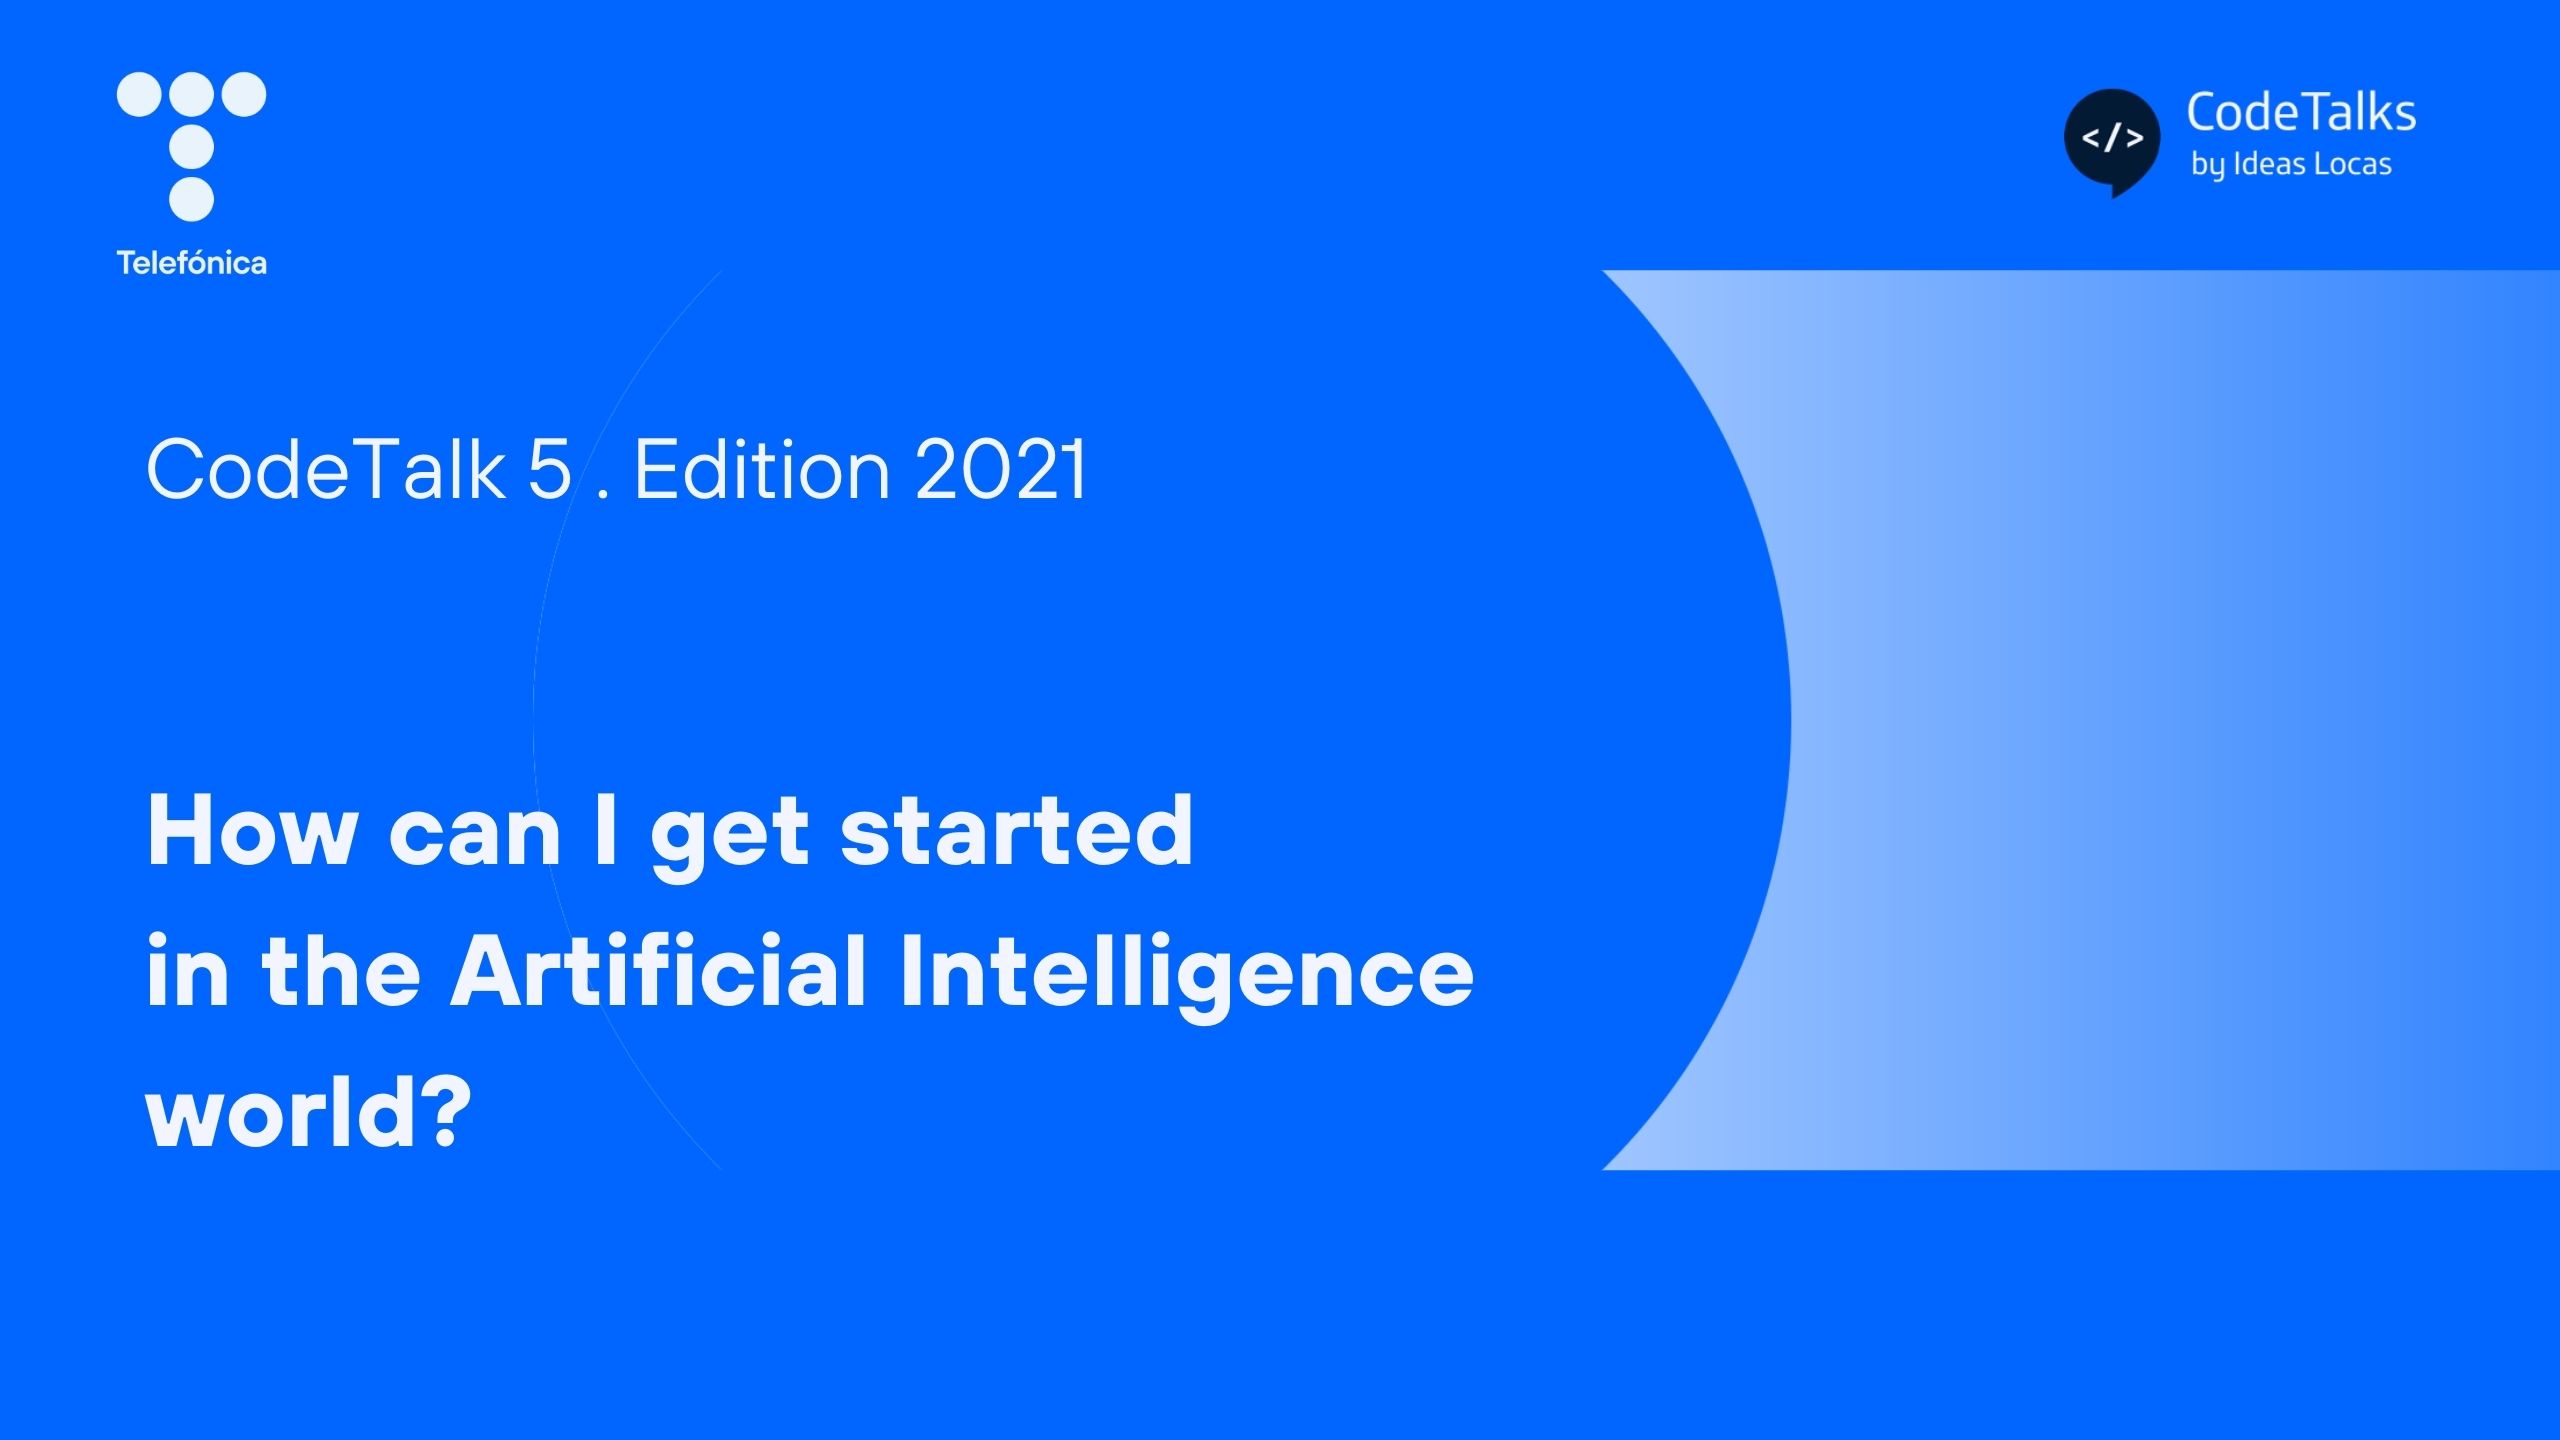 How can I get started in the Artificial Intelligence world?